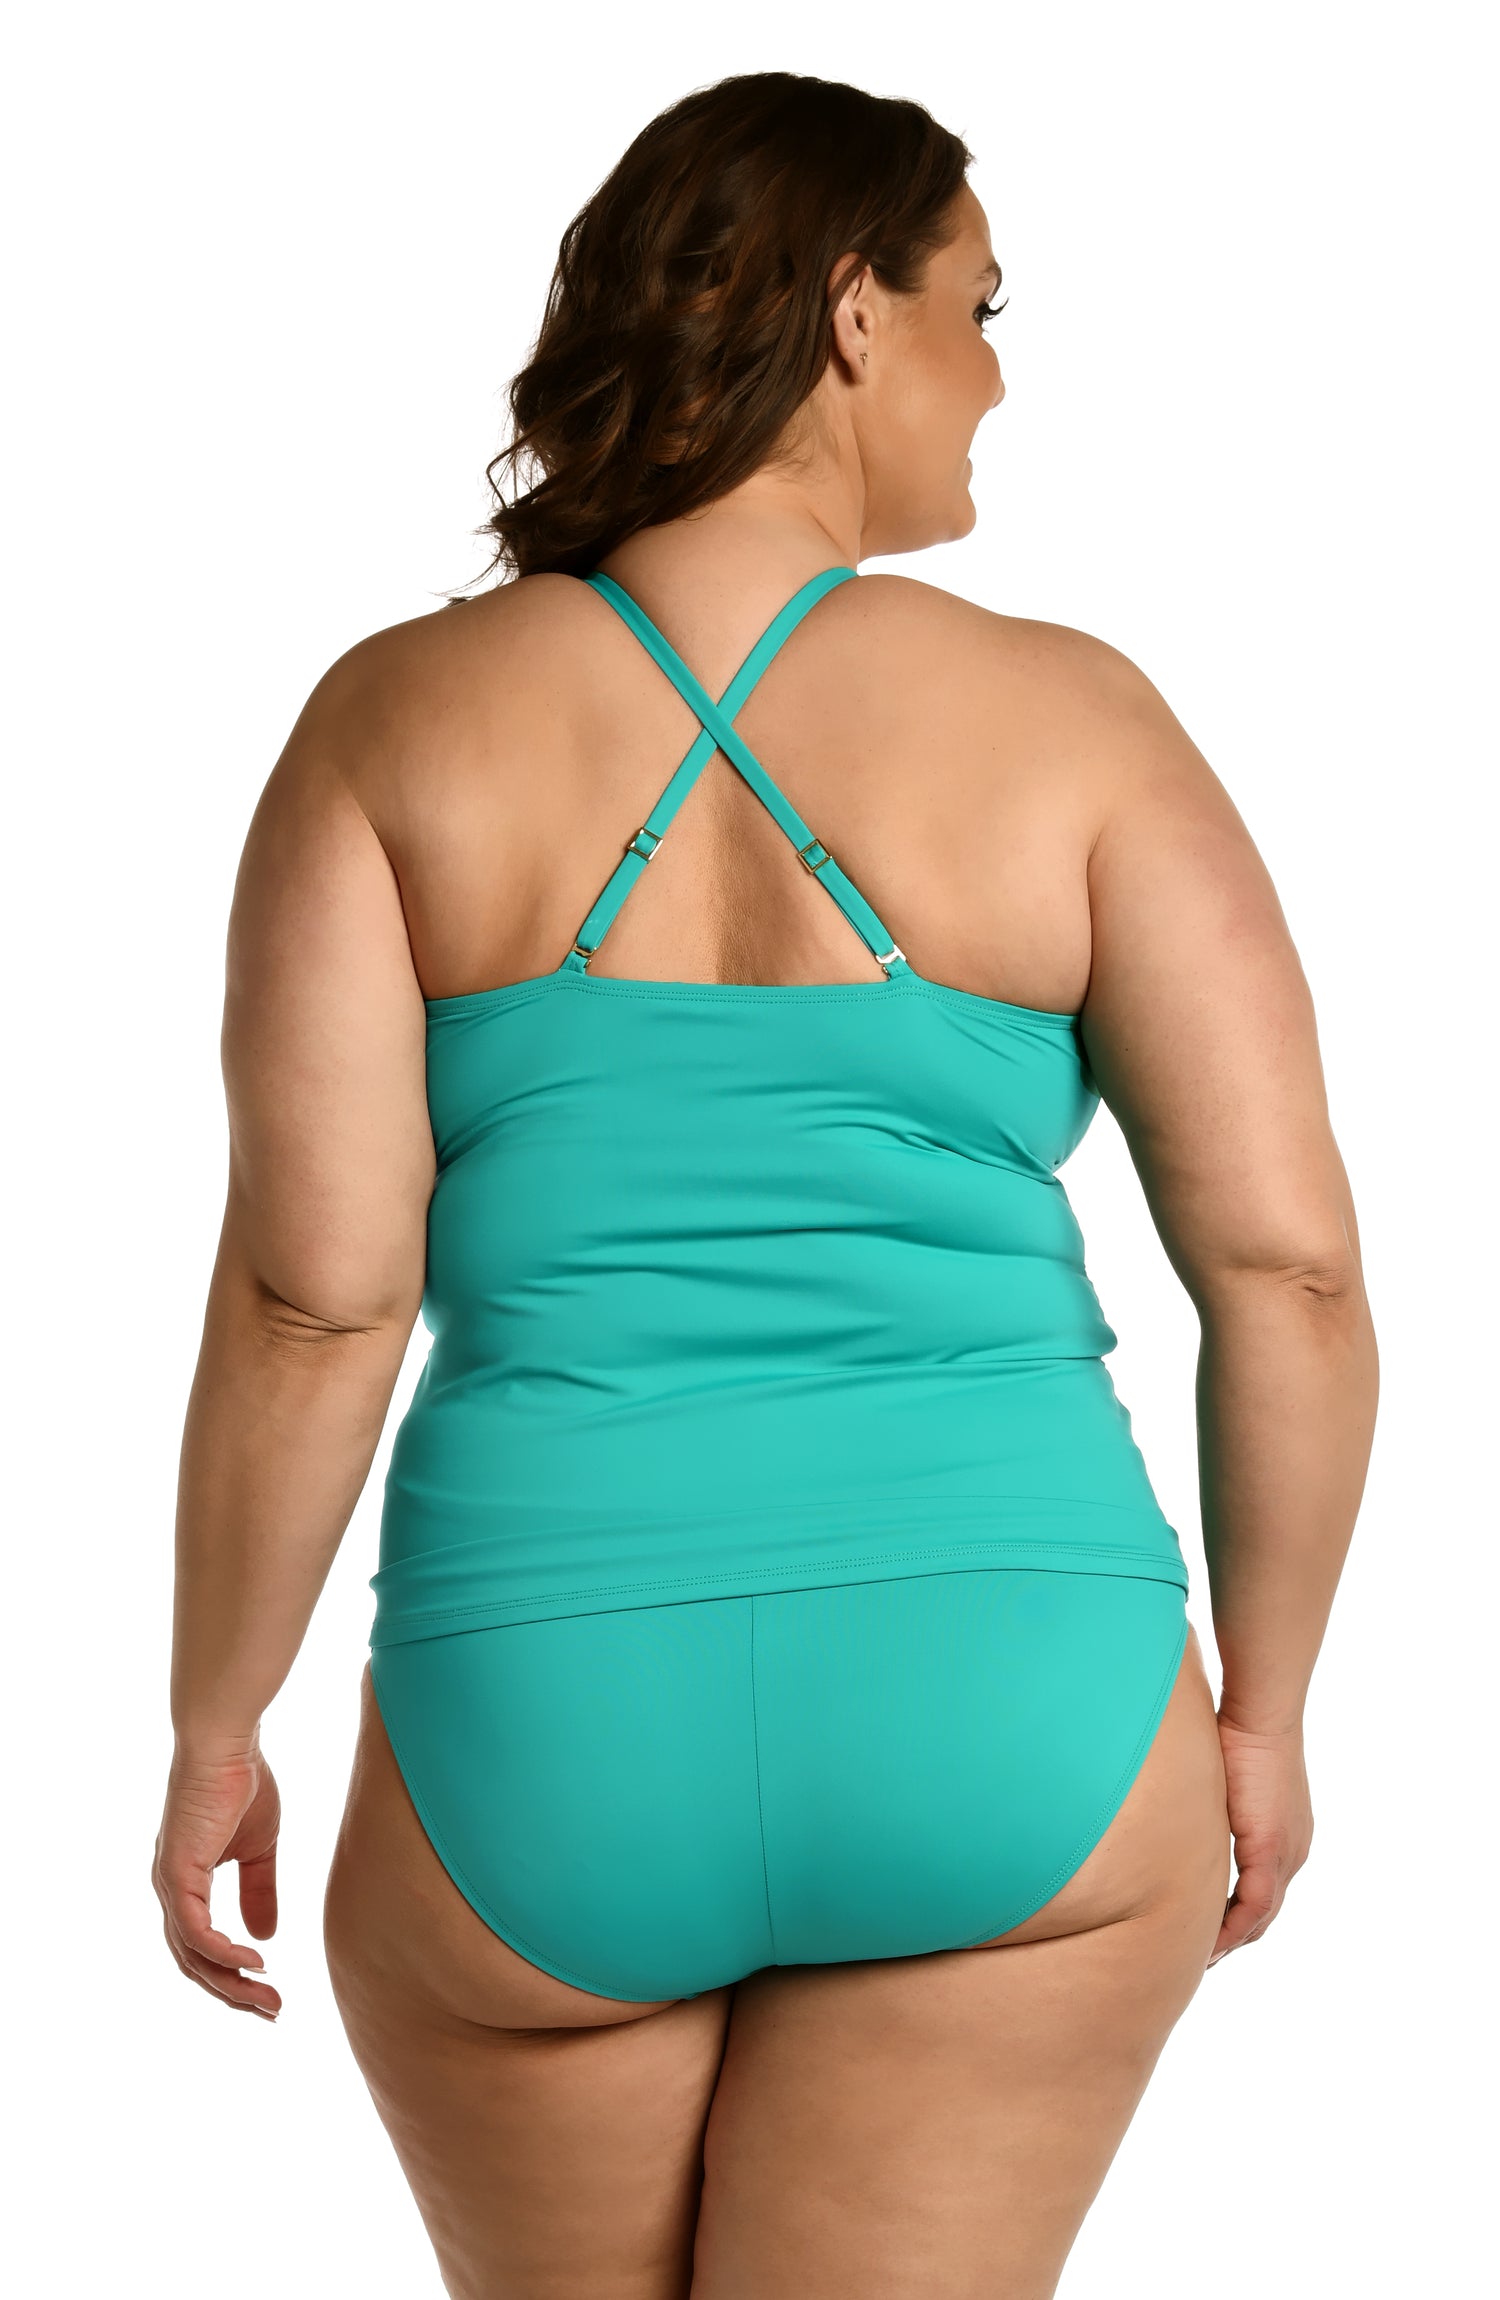 Model is wearing a emerald colored keyhole tankini swimsuit top from our Best-Selling Island Goddess collection.